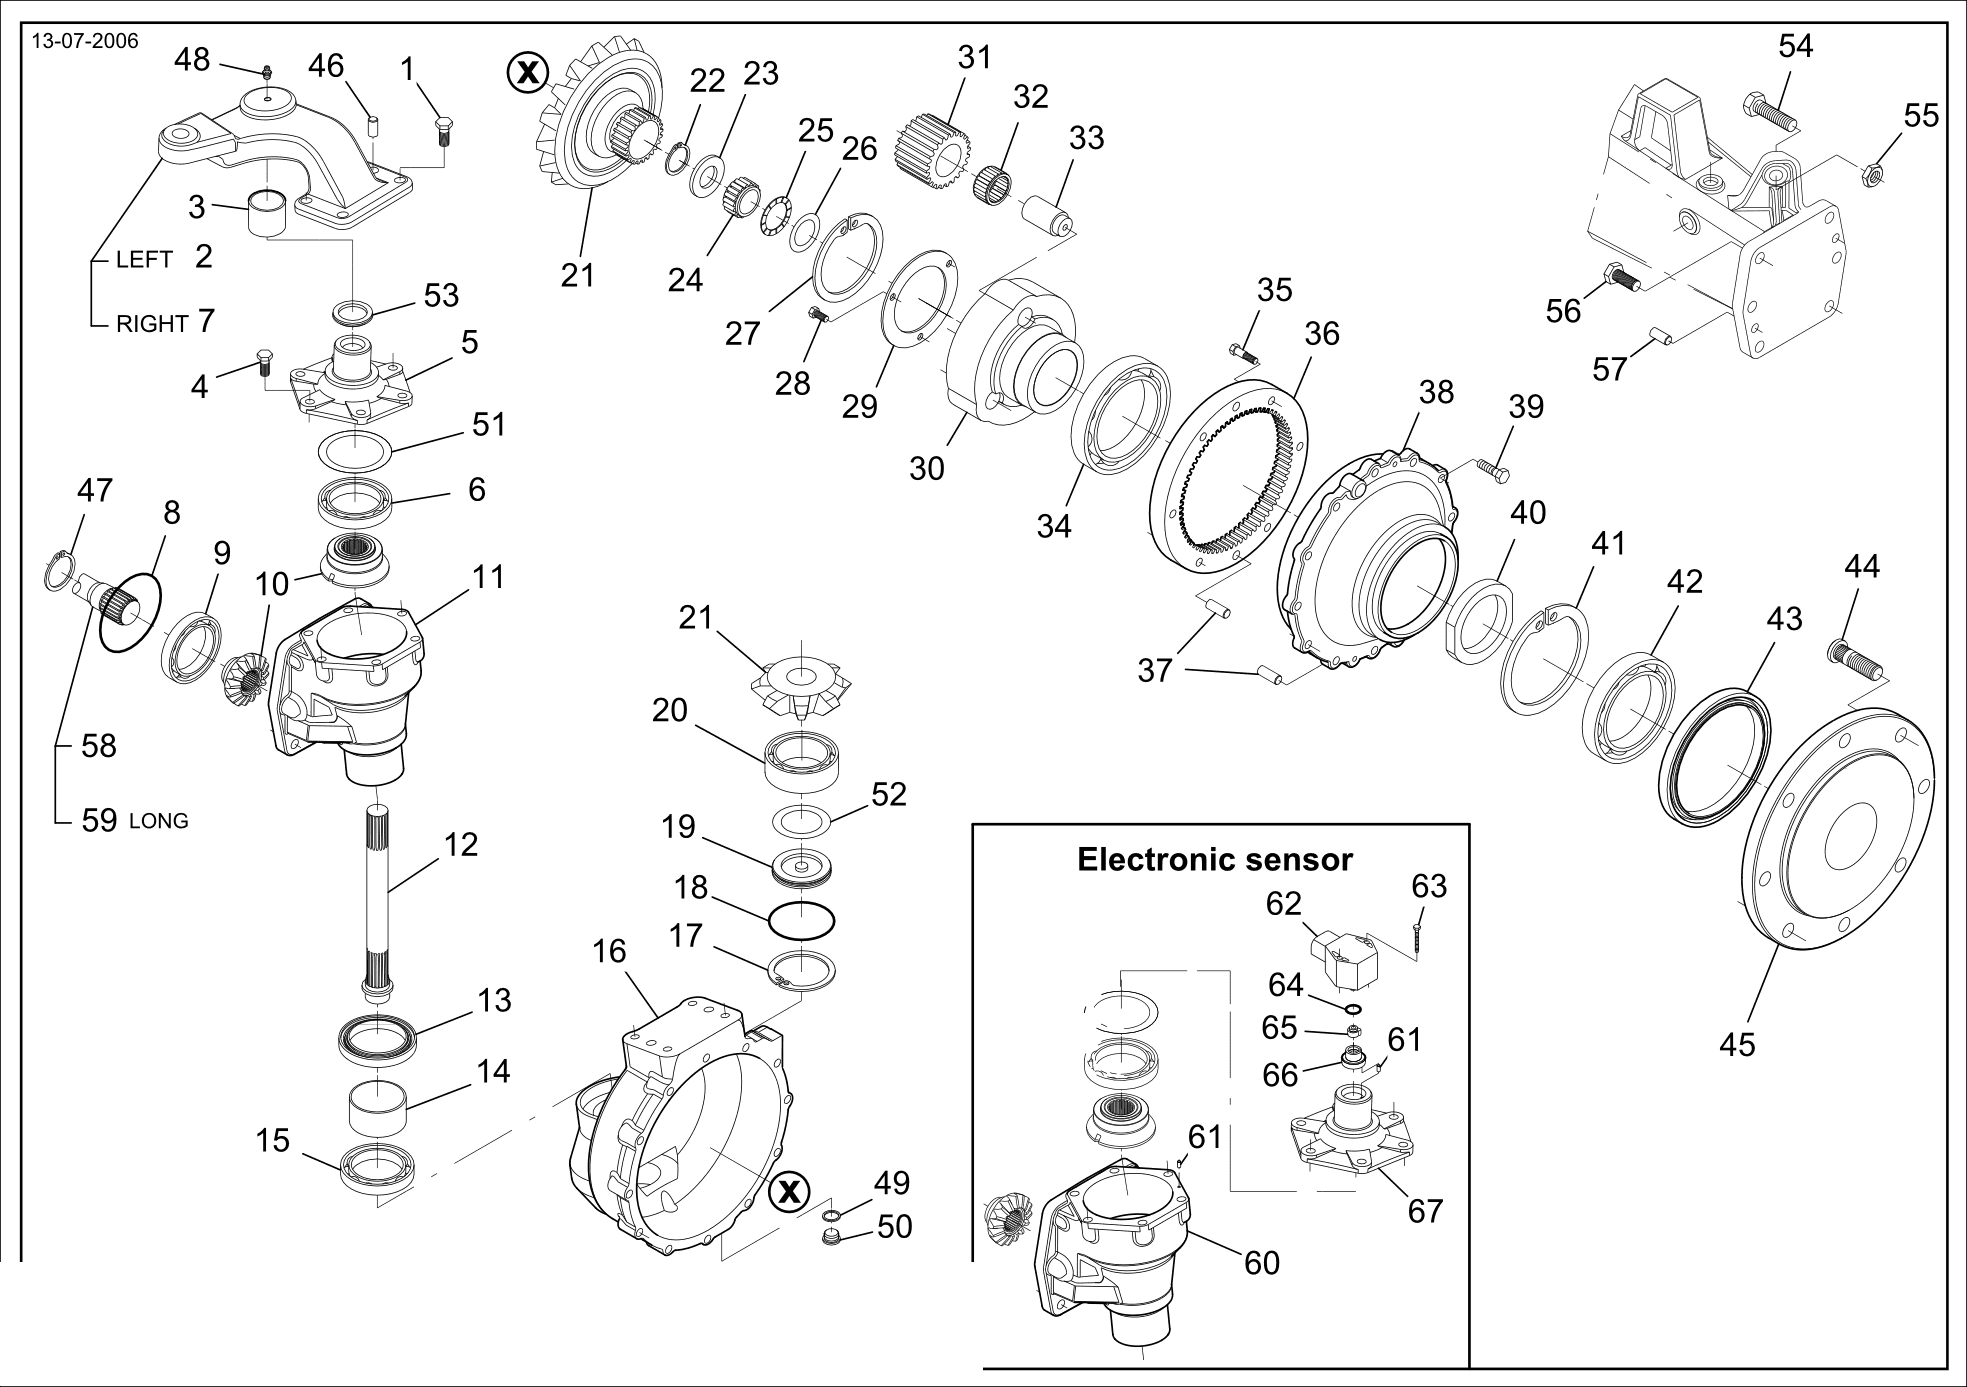 drawing for CNH NEW HOLLAND 87611428 - SCREW (figure 4)